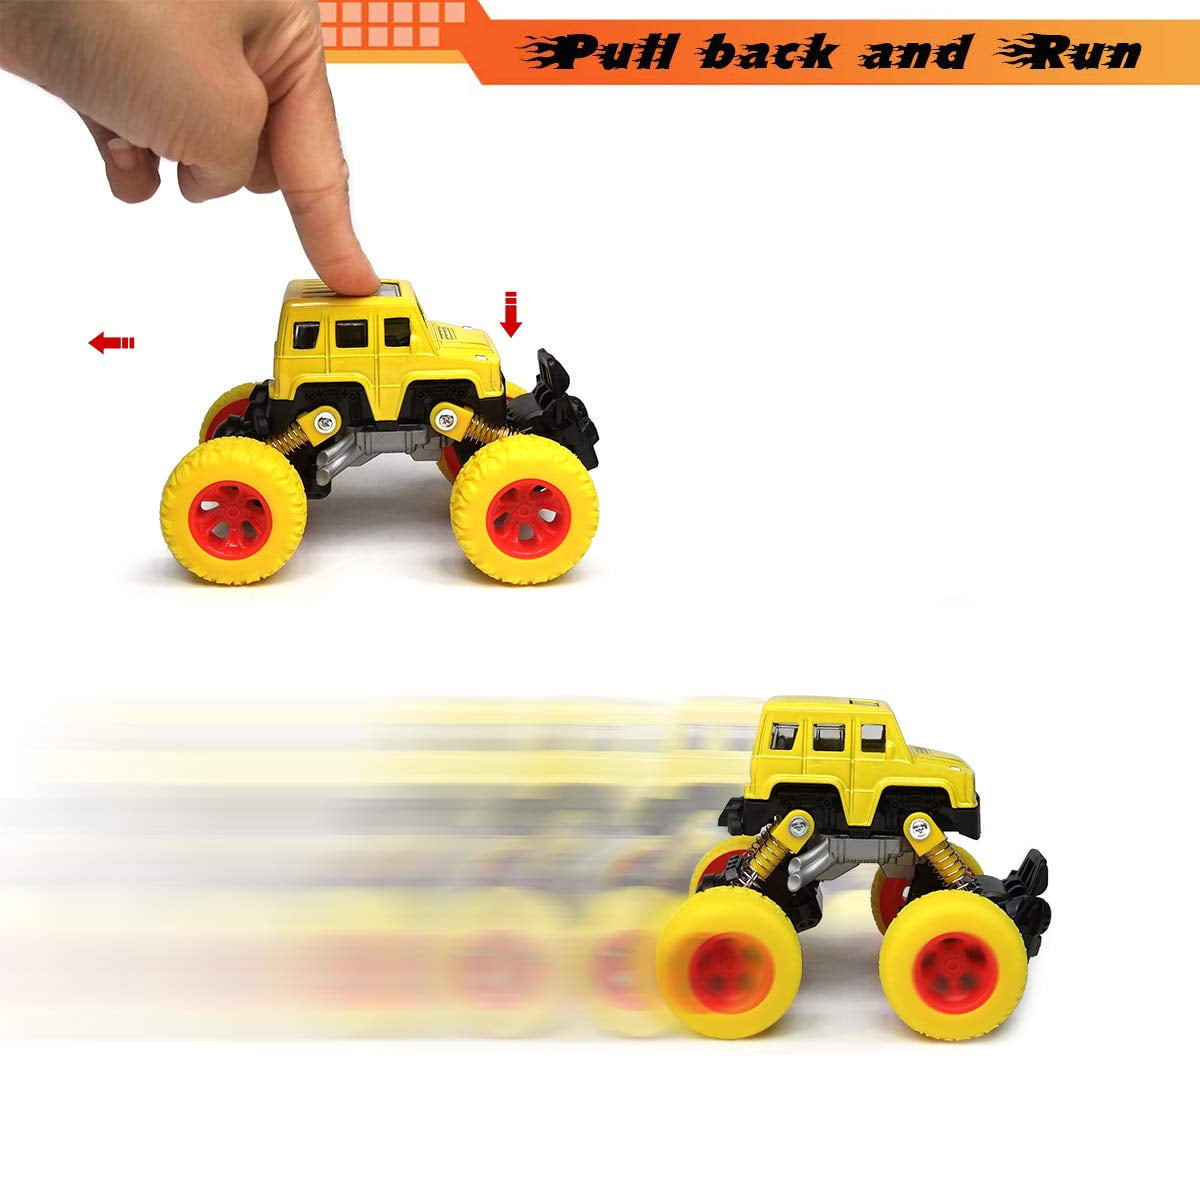 Epoch Air Pull Back Car Toys,Friction Powered Cars Boy Toys Vehicles Include 2 Motocycles with Fun Lights & Sounds for Children Kids Boys Girls 